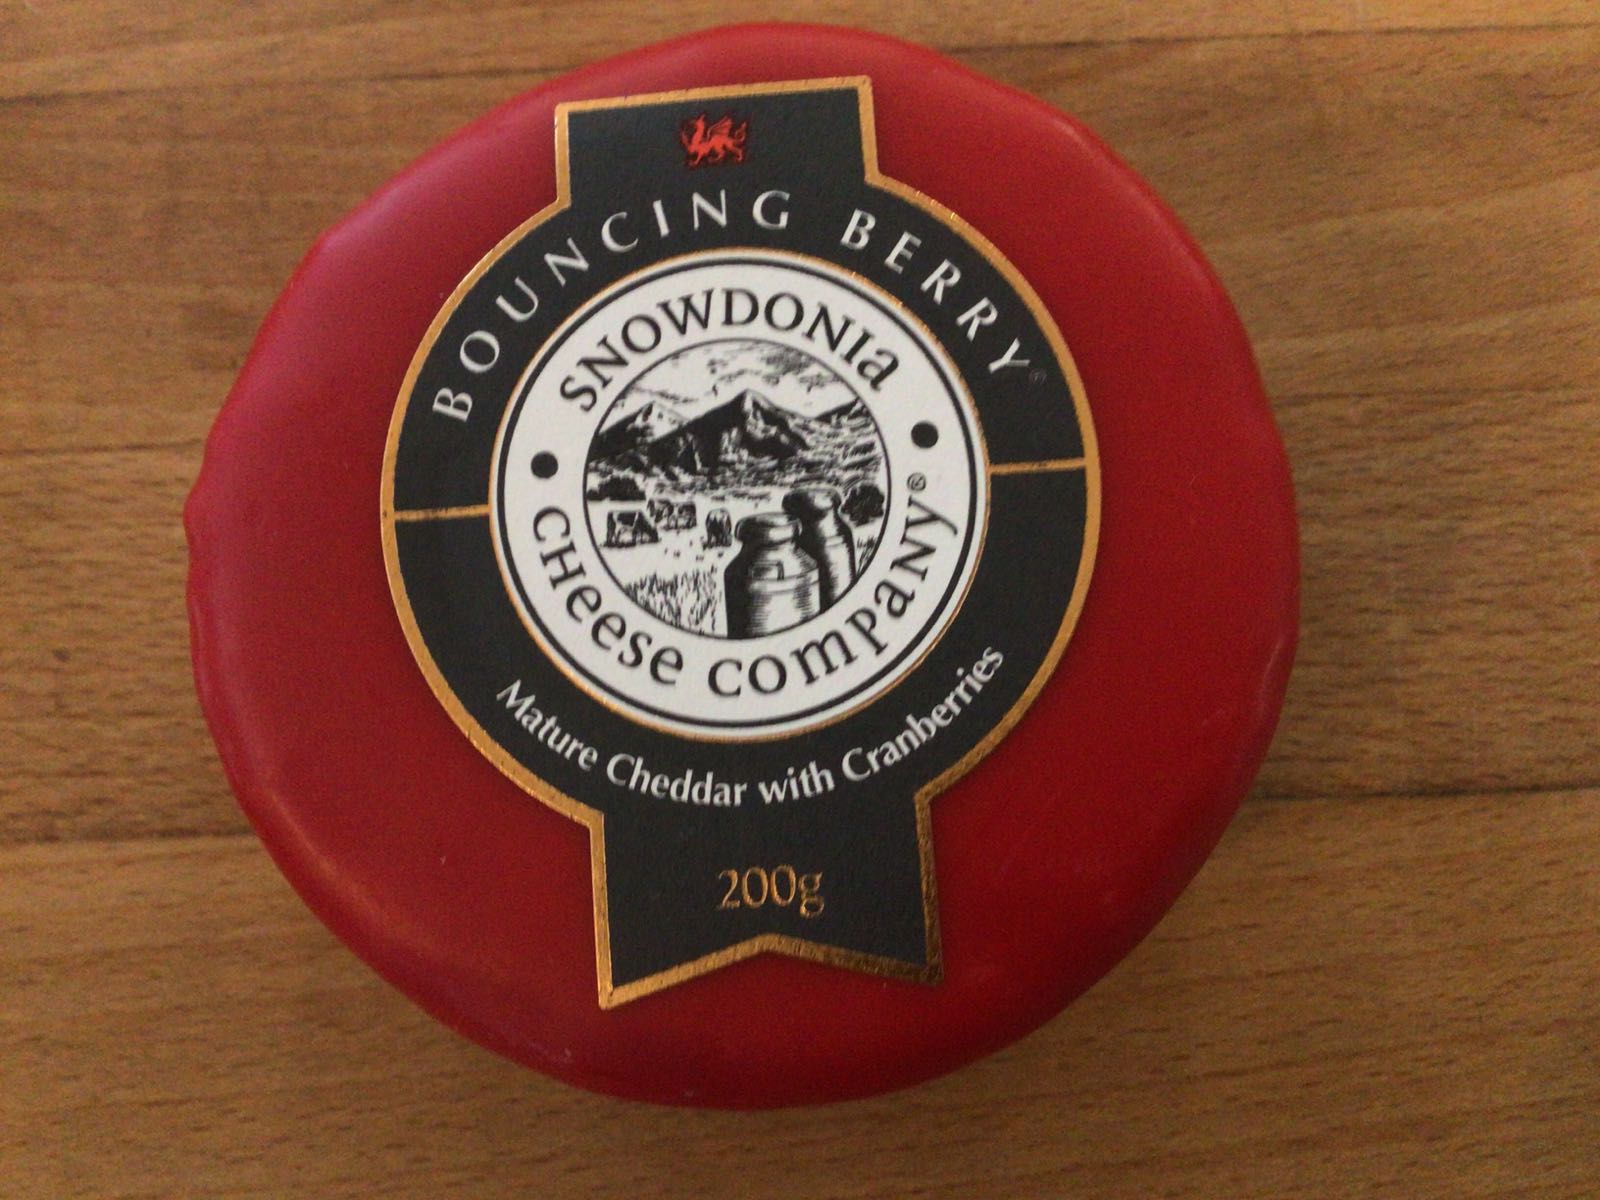 Snowdonia Bouncing Berry 200g